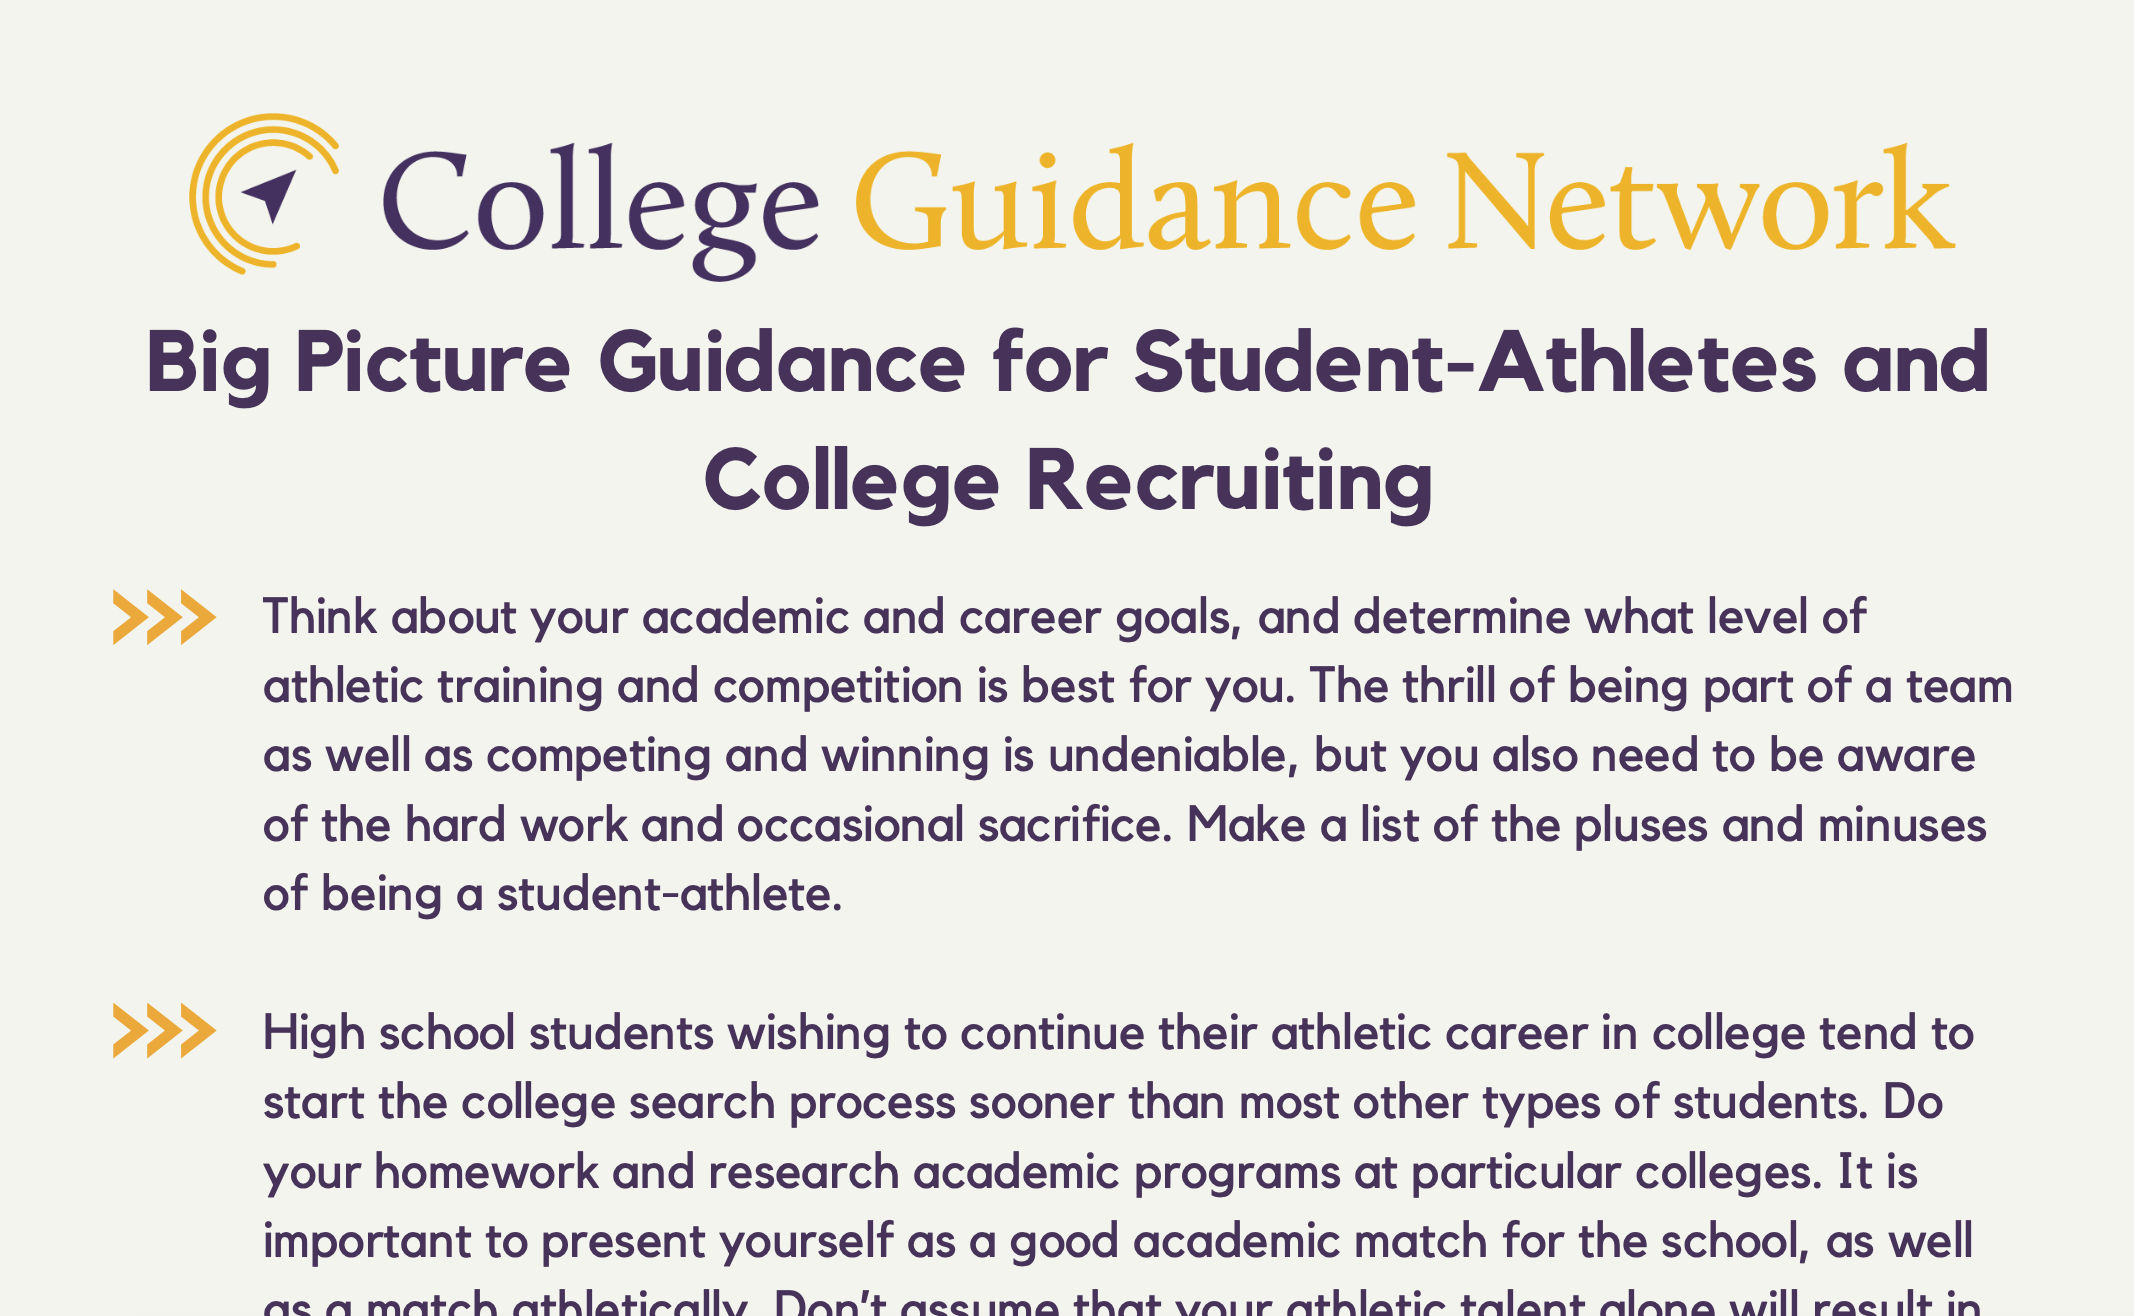 Big Picture Guidance for Student-Athletes and College Recruiting